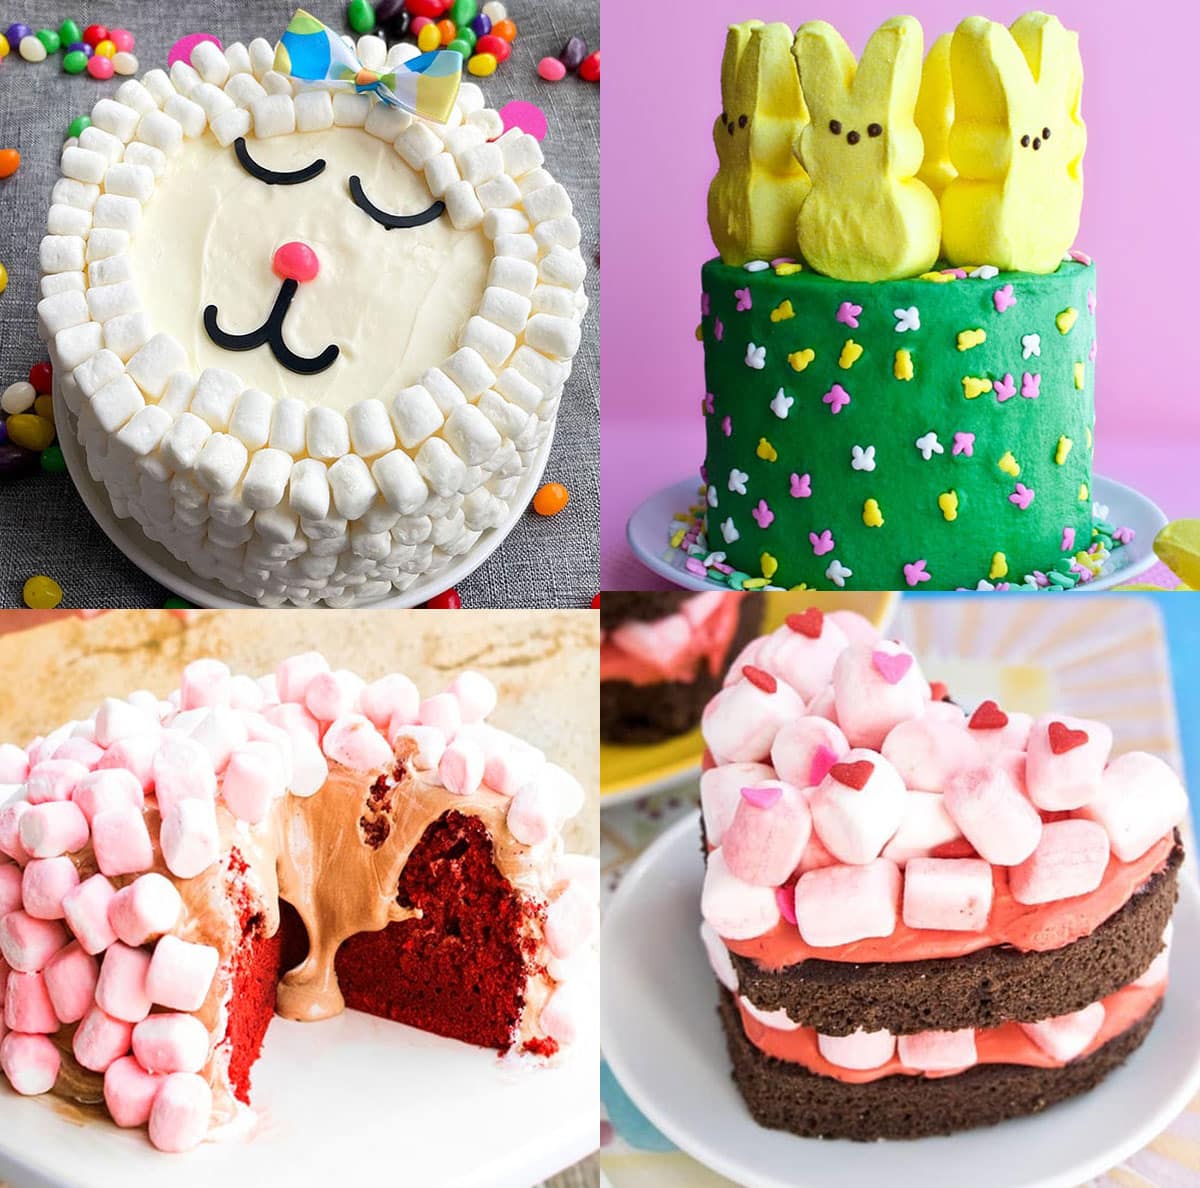 Our Most Creative Cake Ideas - Recipes.net